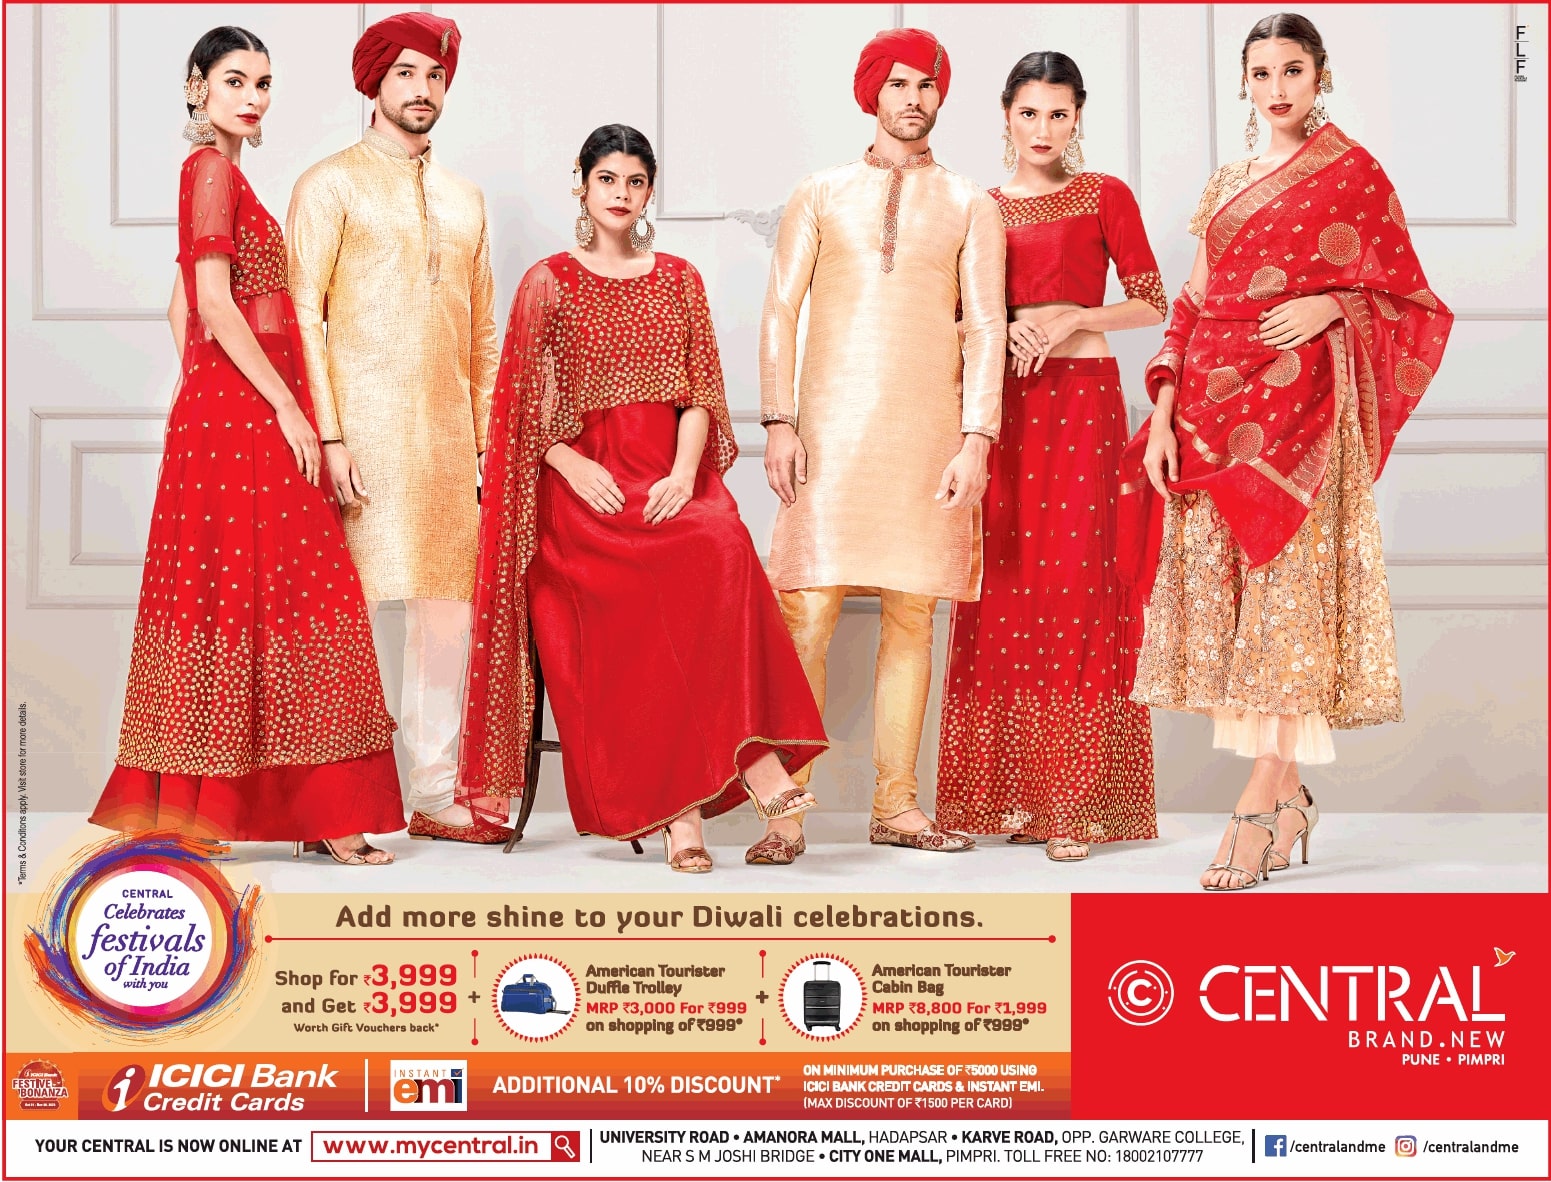 central-brand-new-add-more-shine-to-your-diwali-celebrations-ad-toi-pune-12-11-2020